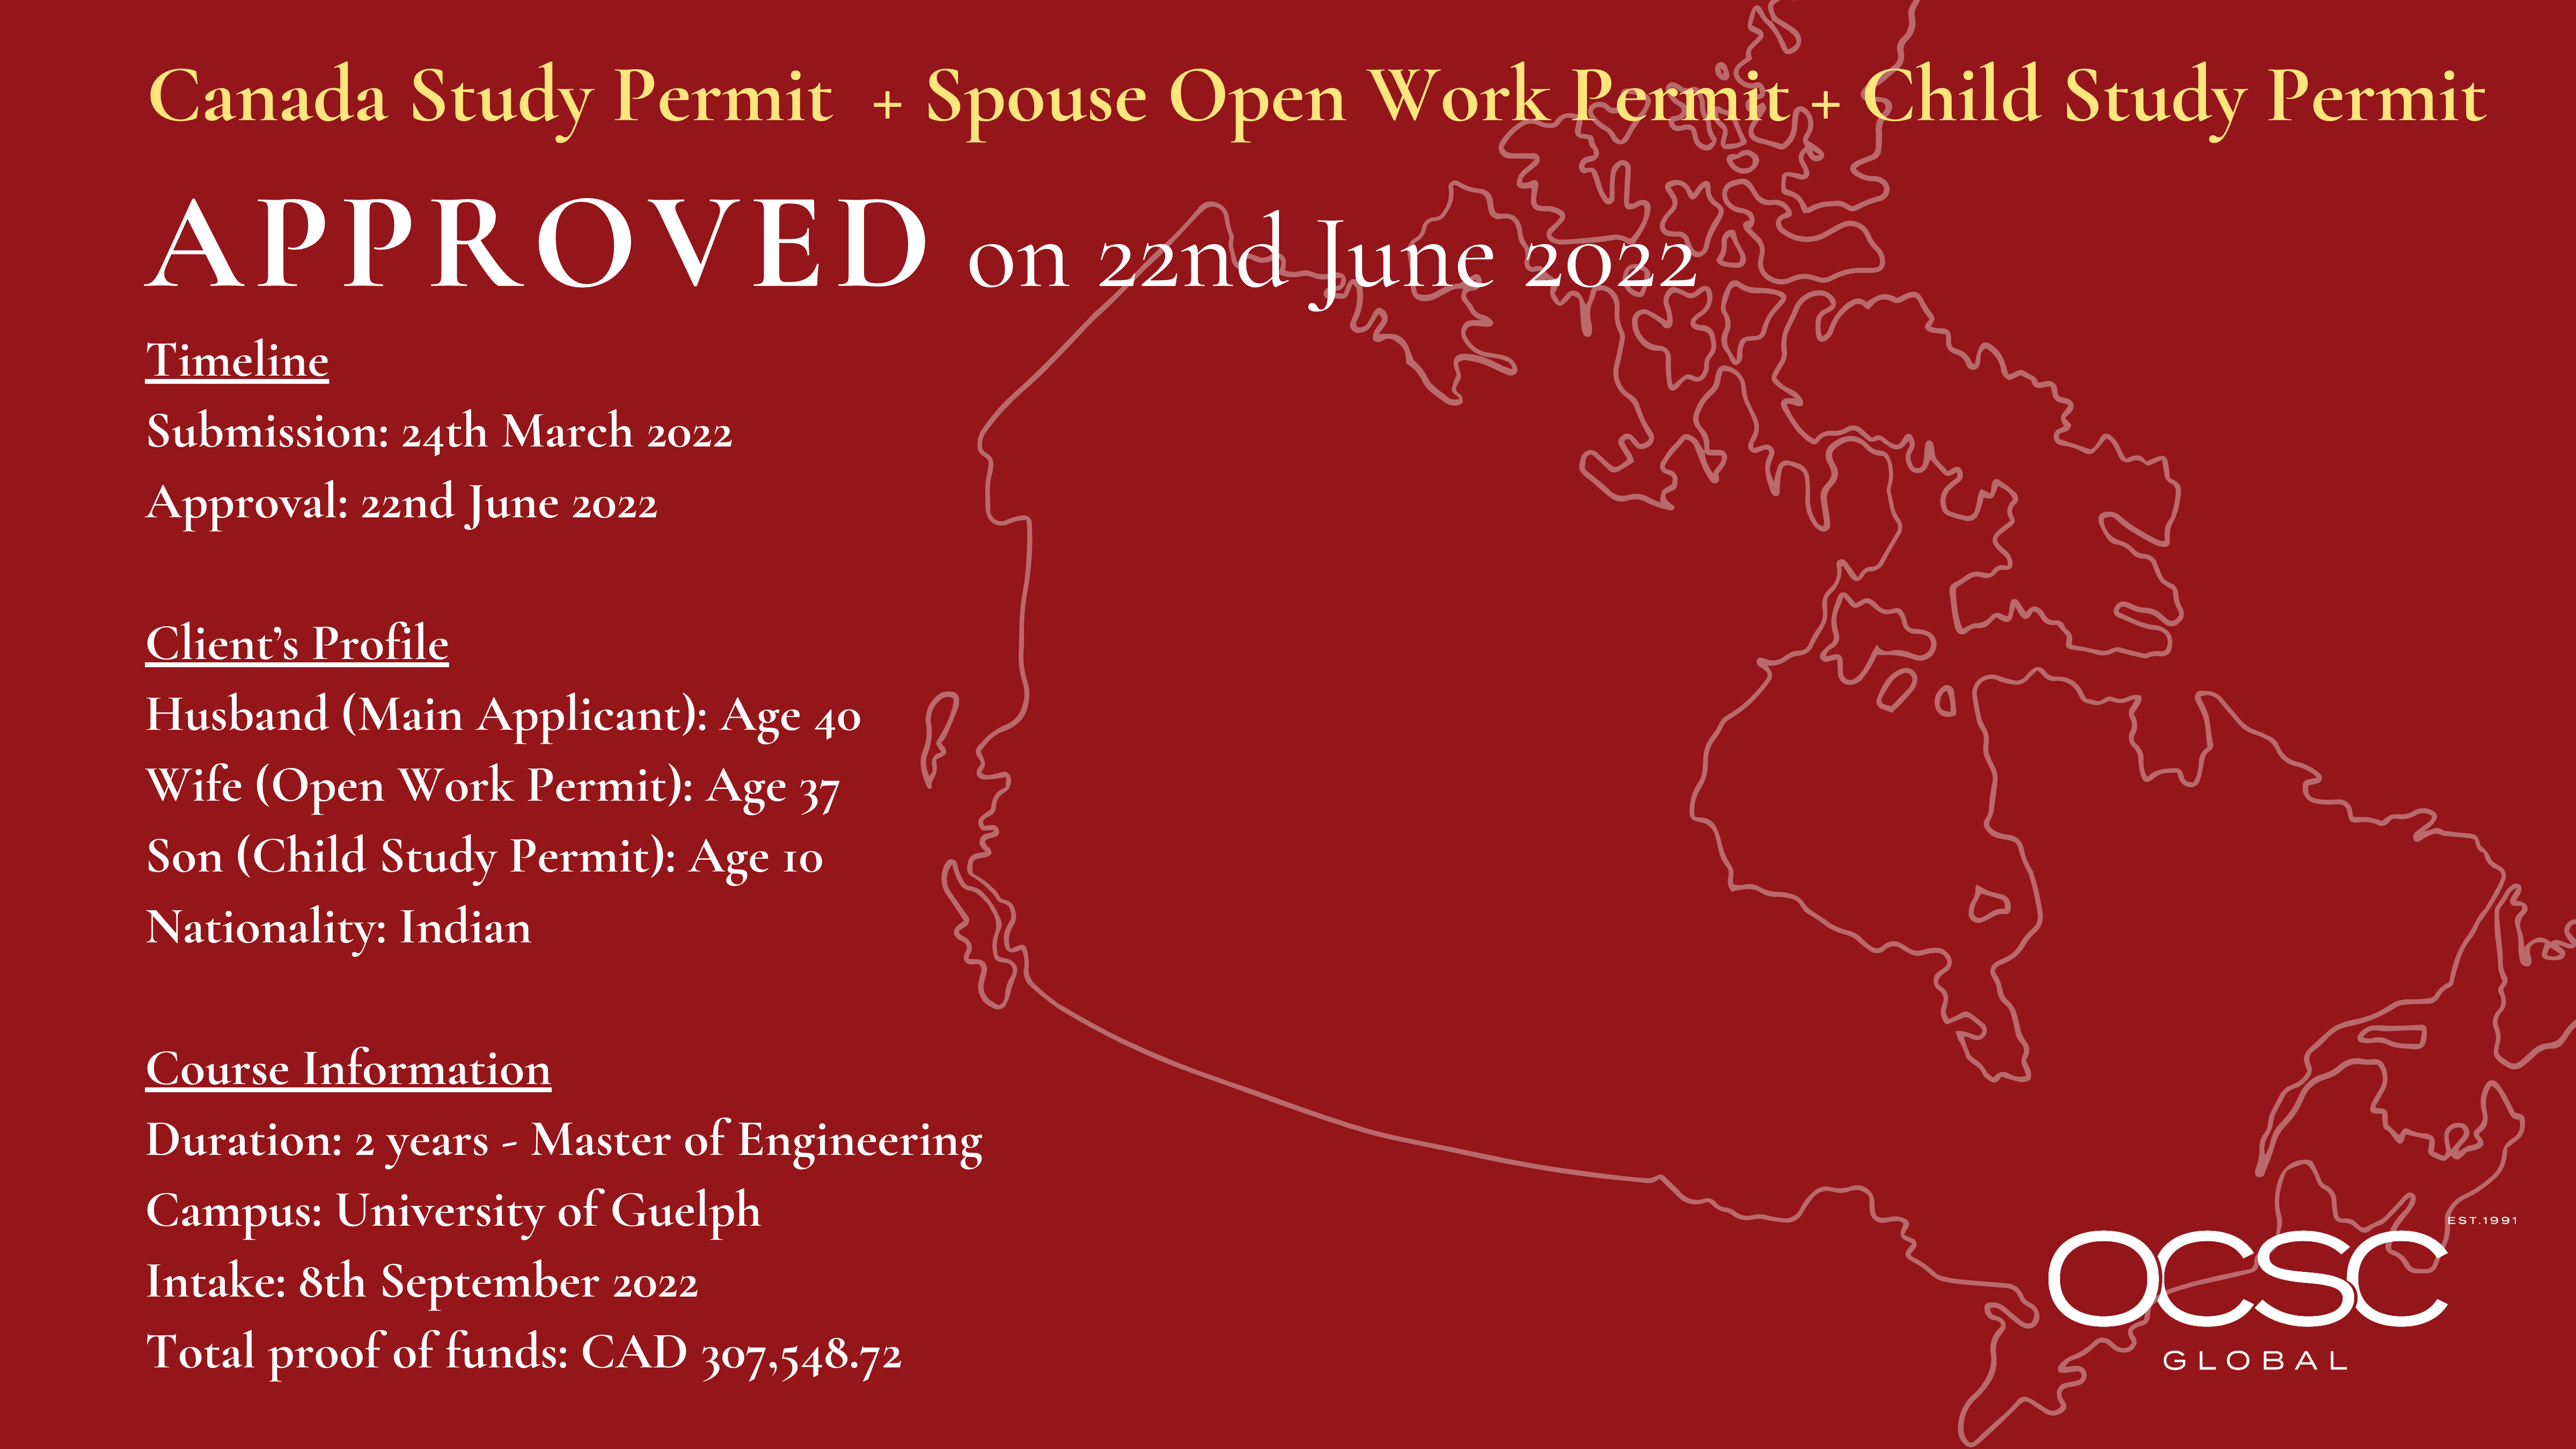 Approved for Canada Study Permit + Spouse Open Work Permit + Child Study Permit